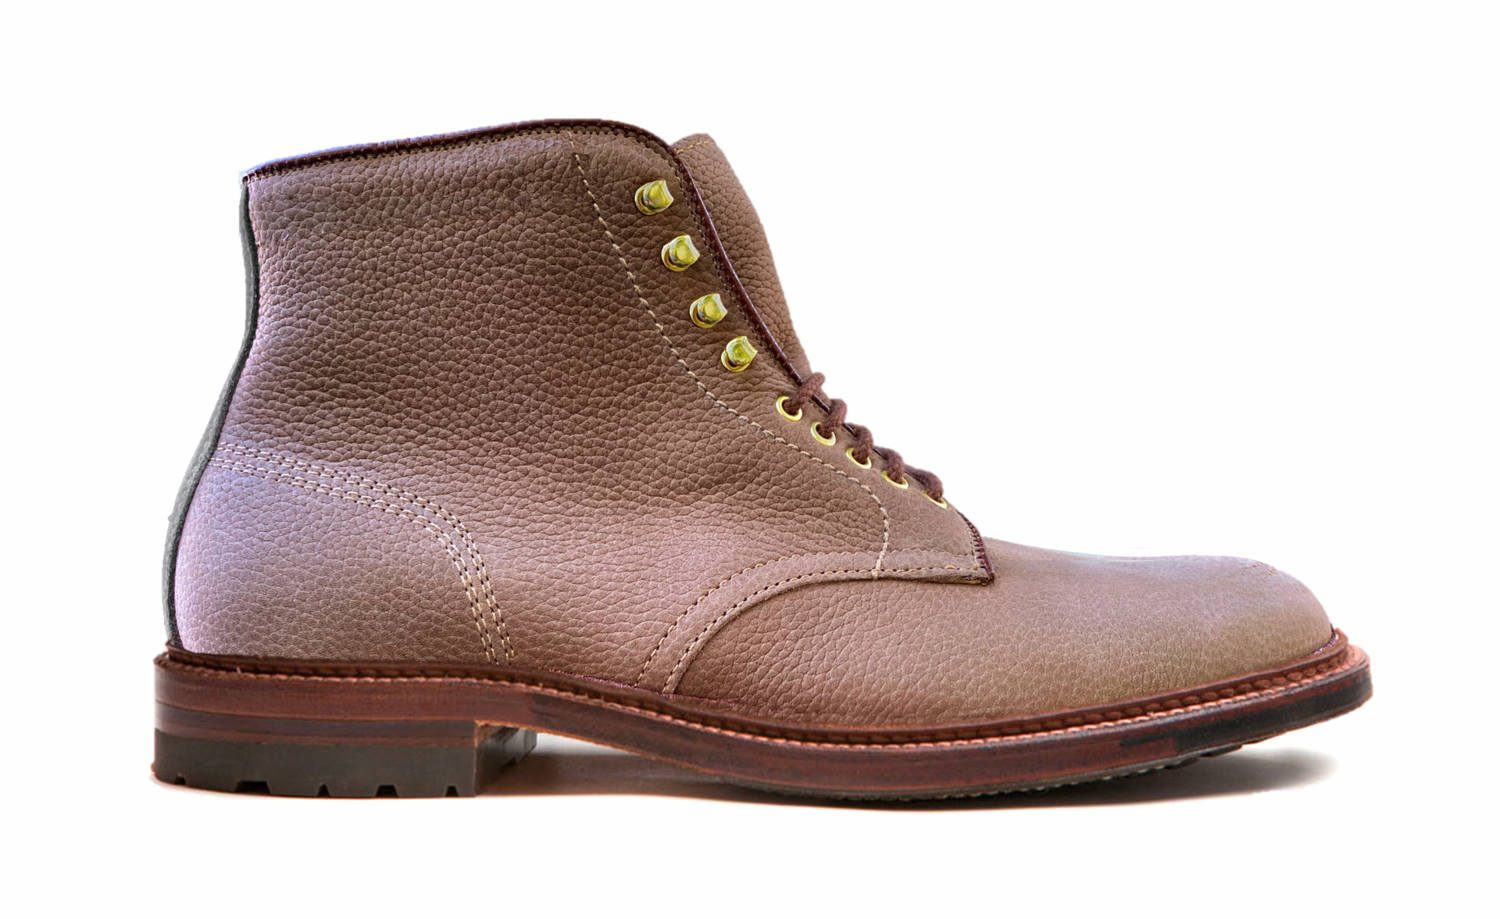 Pre Order - Alden x Zahner's Clothiers "Roth Boot 2.0" Clay Nubuck Plain  Toe Boot - DEPOSIT ONLY*